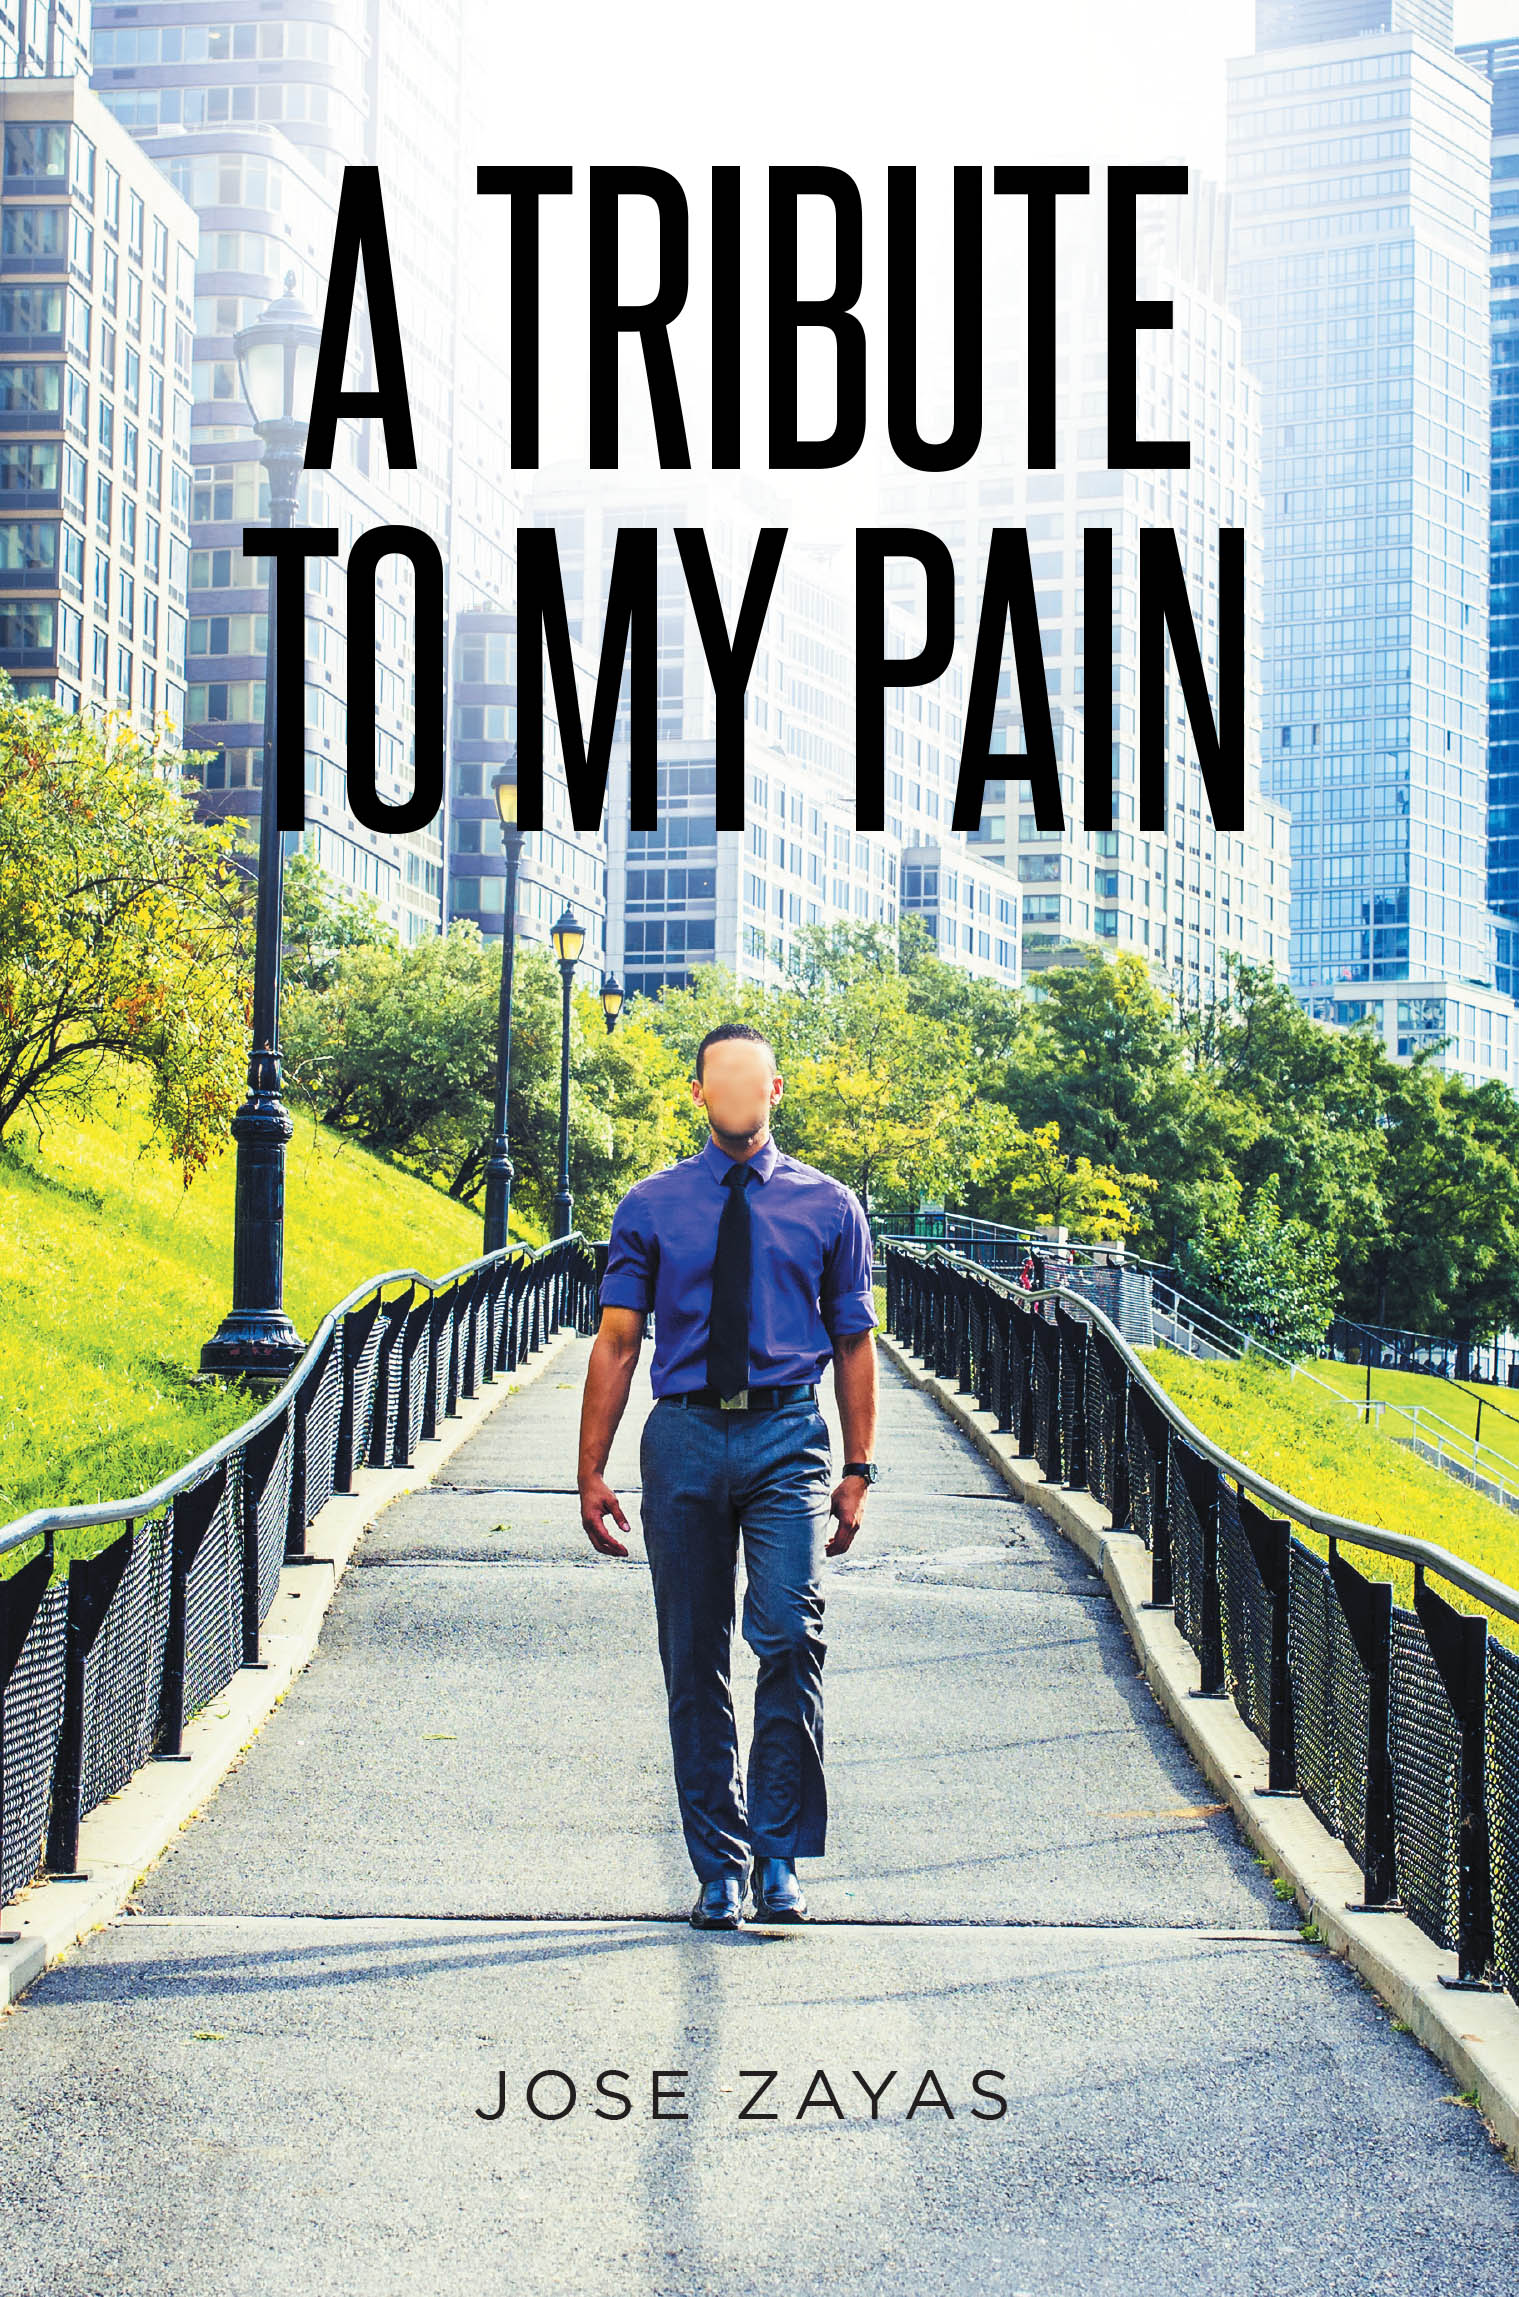 Author Jose Zayas’s New Book, "A Tribute to My Pain," is a Poignant Collection of Reflections on the Author’s Struggles, Regrets, and Redemption Throughout Life